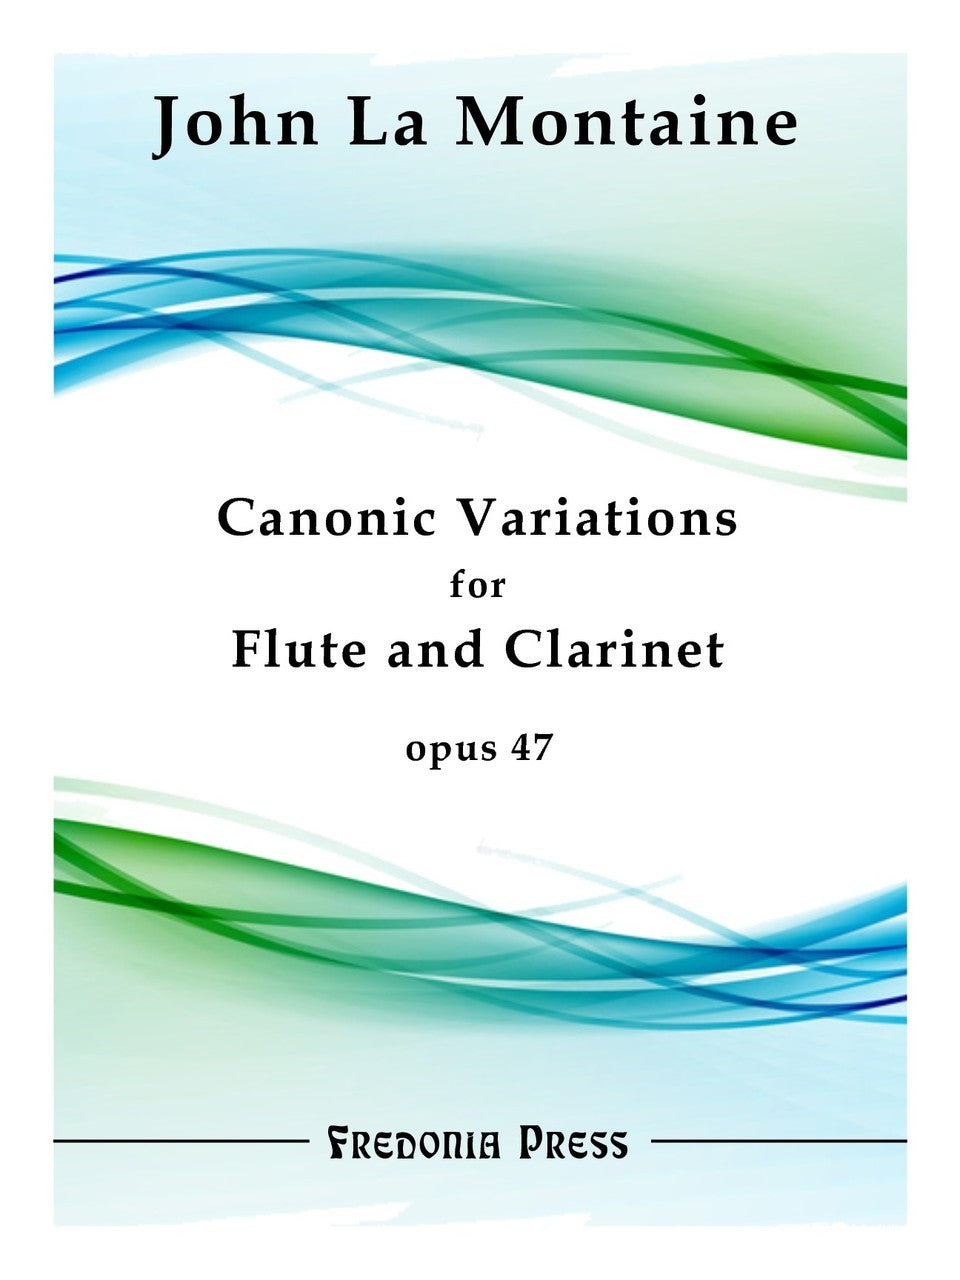 La Montaine - Canonic Variations for Flute and Clarinet, Opus 47